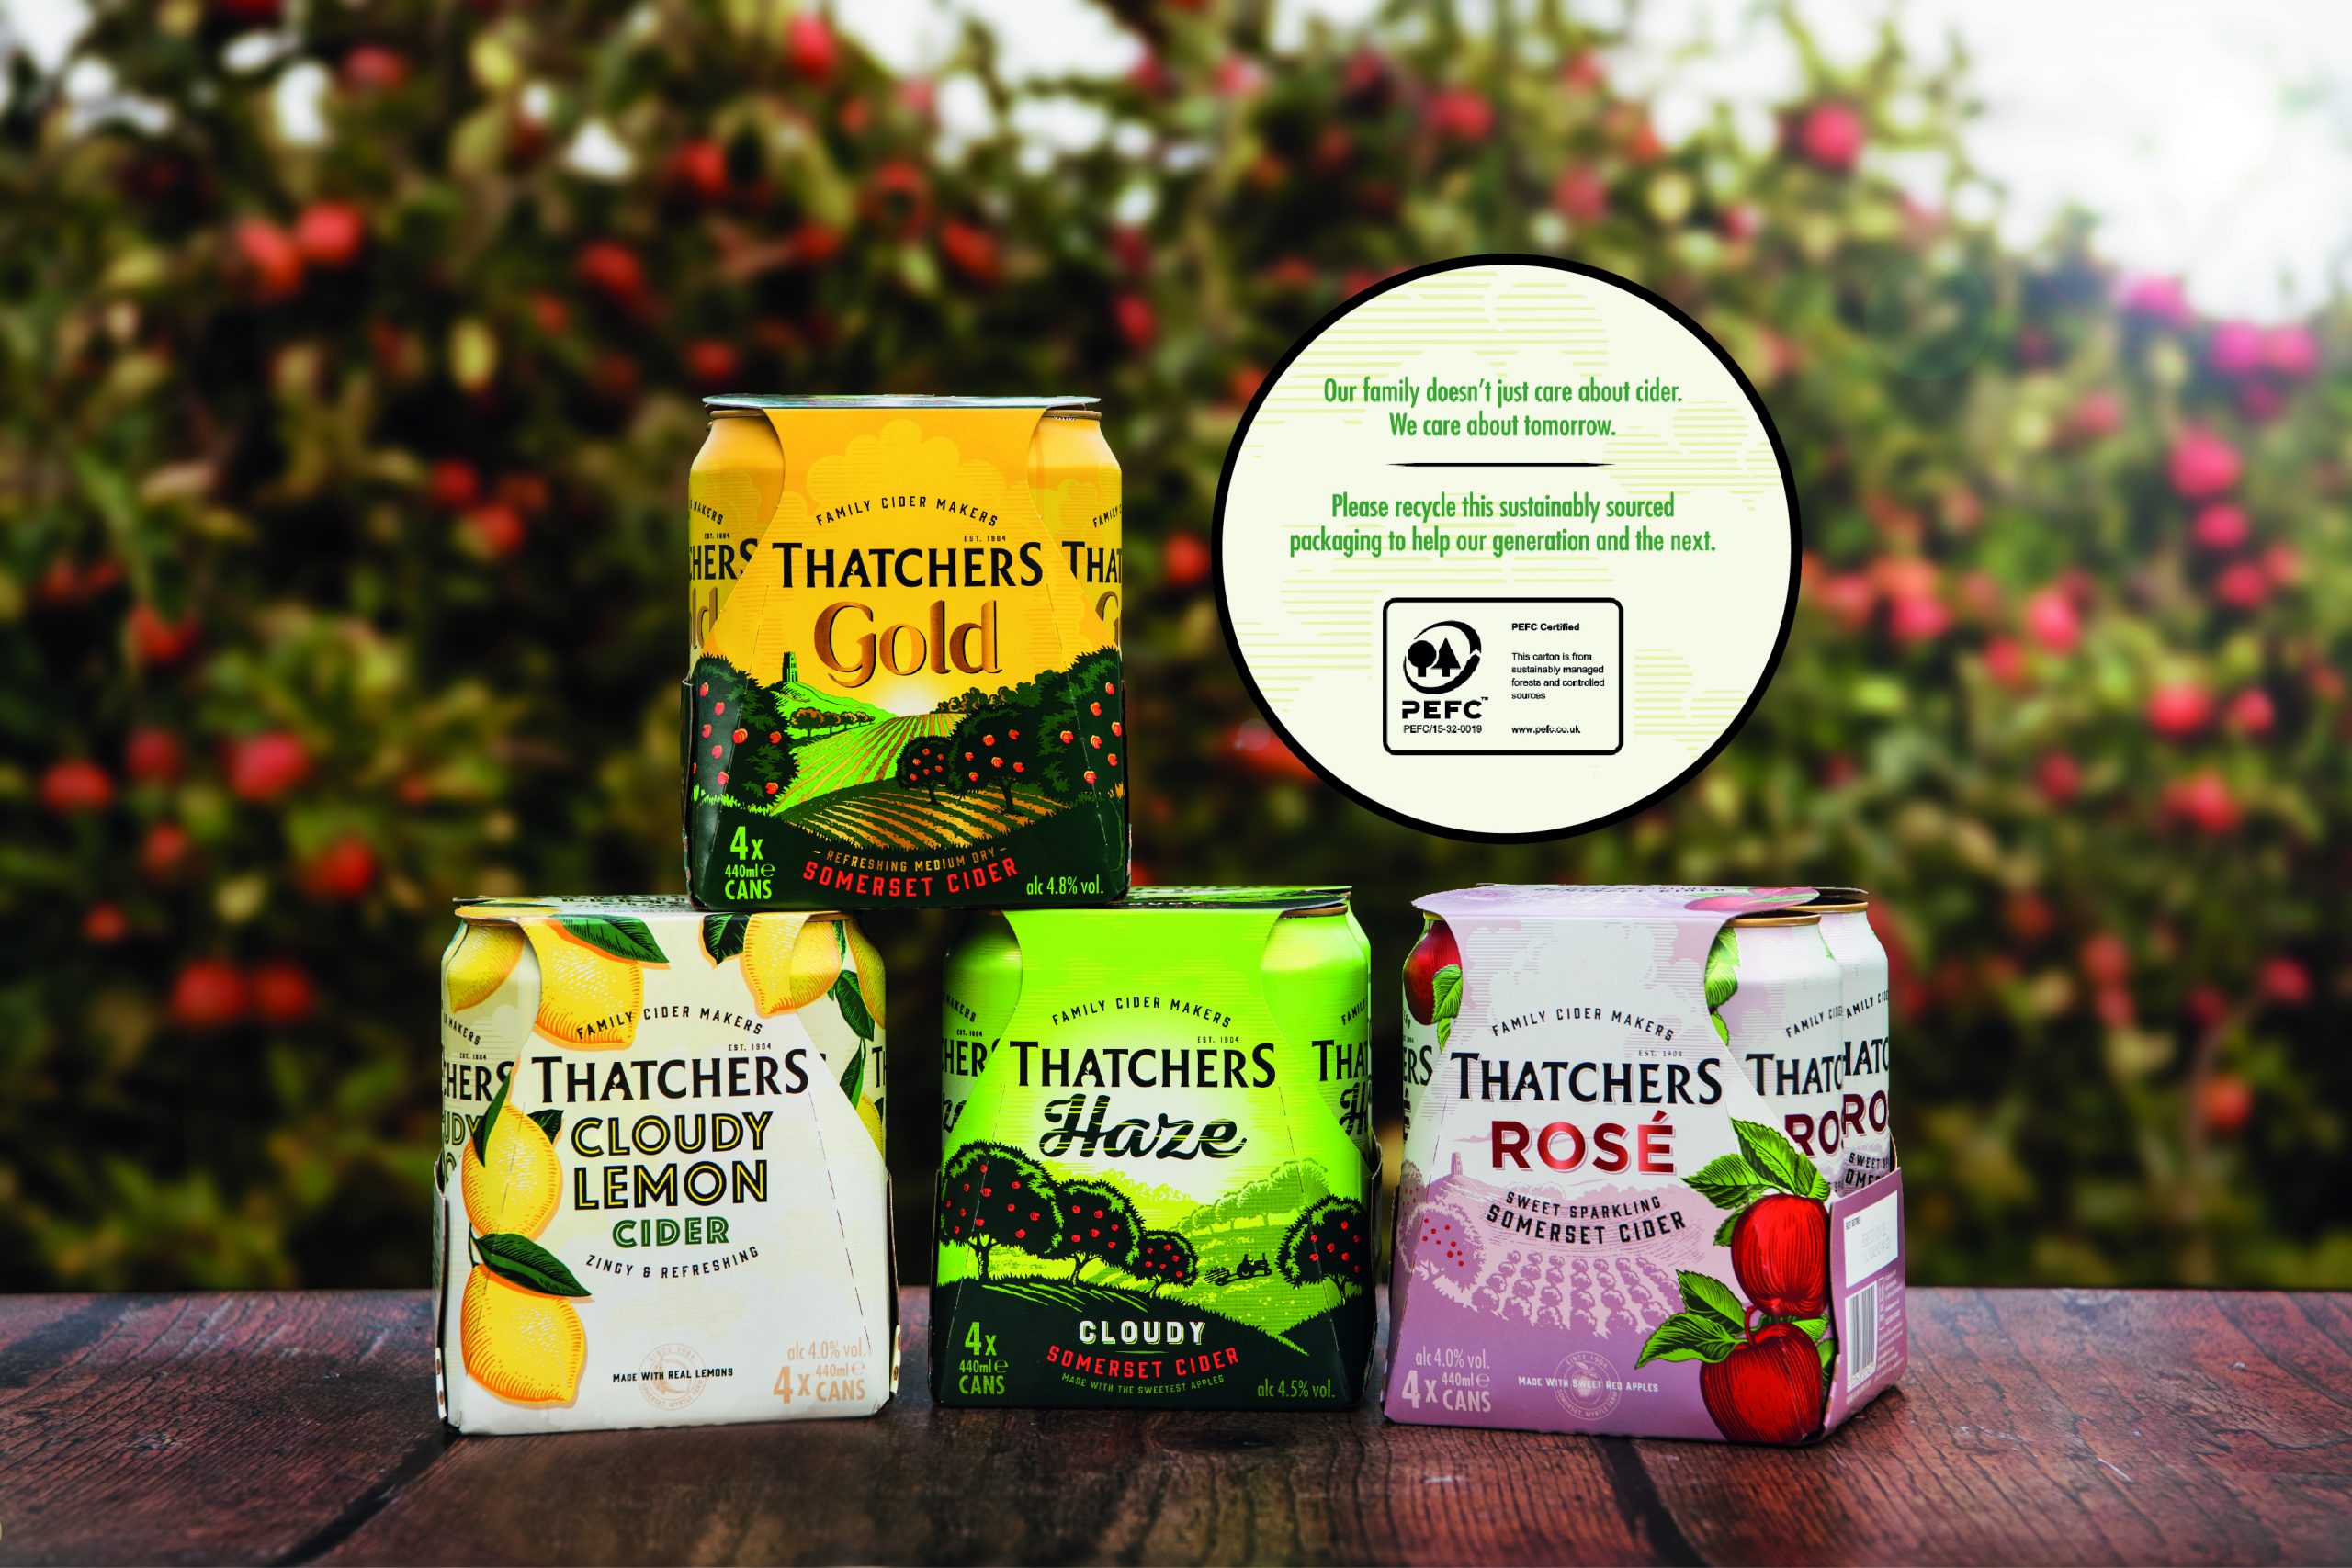 Thatchers cider: 20m plastic rings saved in a year